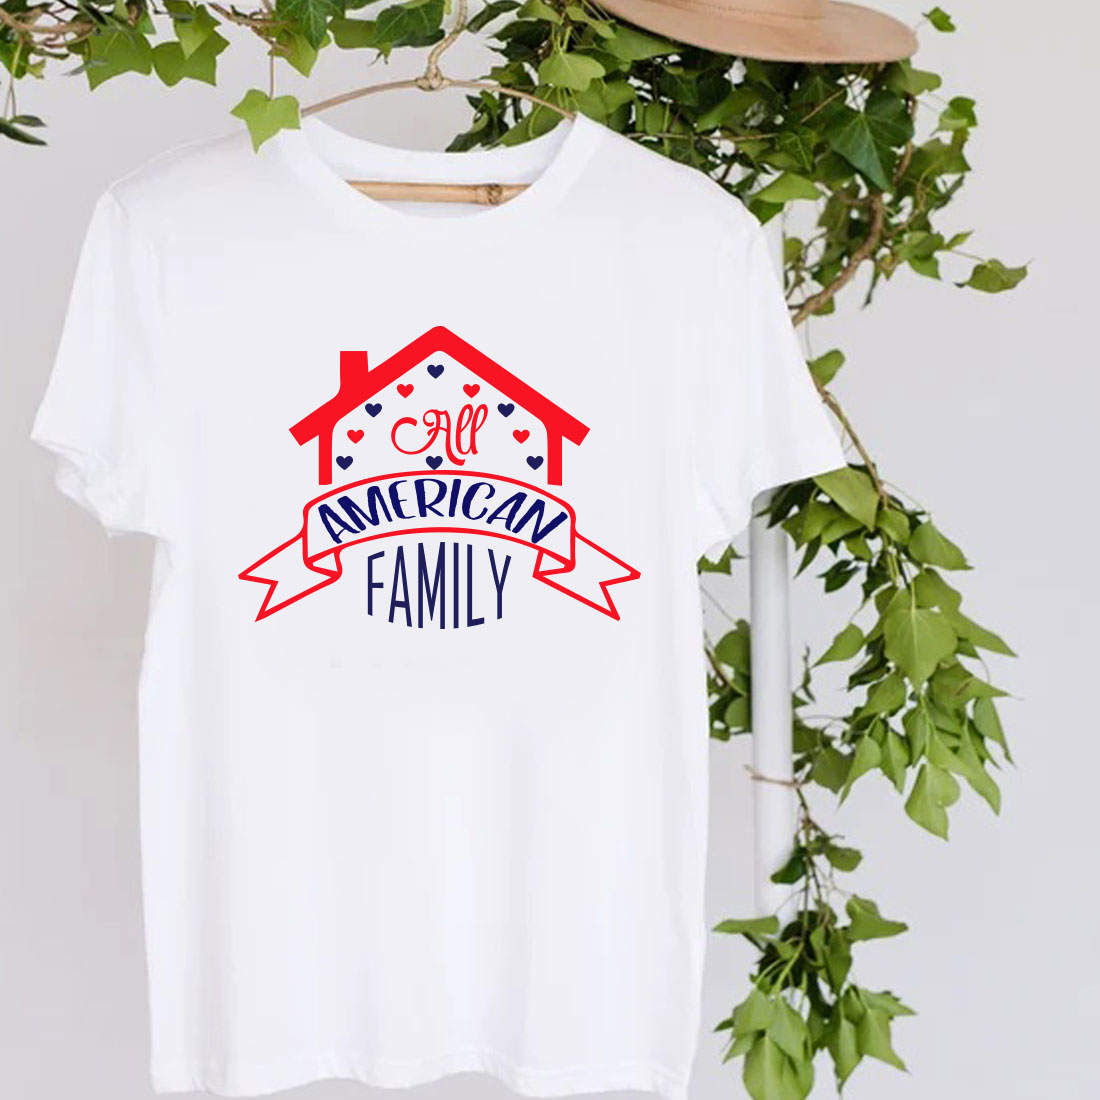 American family t - shirt hanging on a wall.